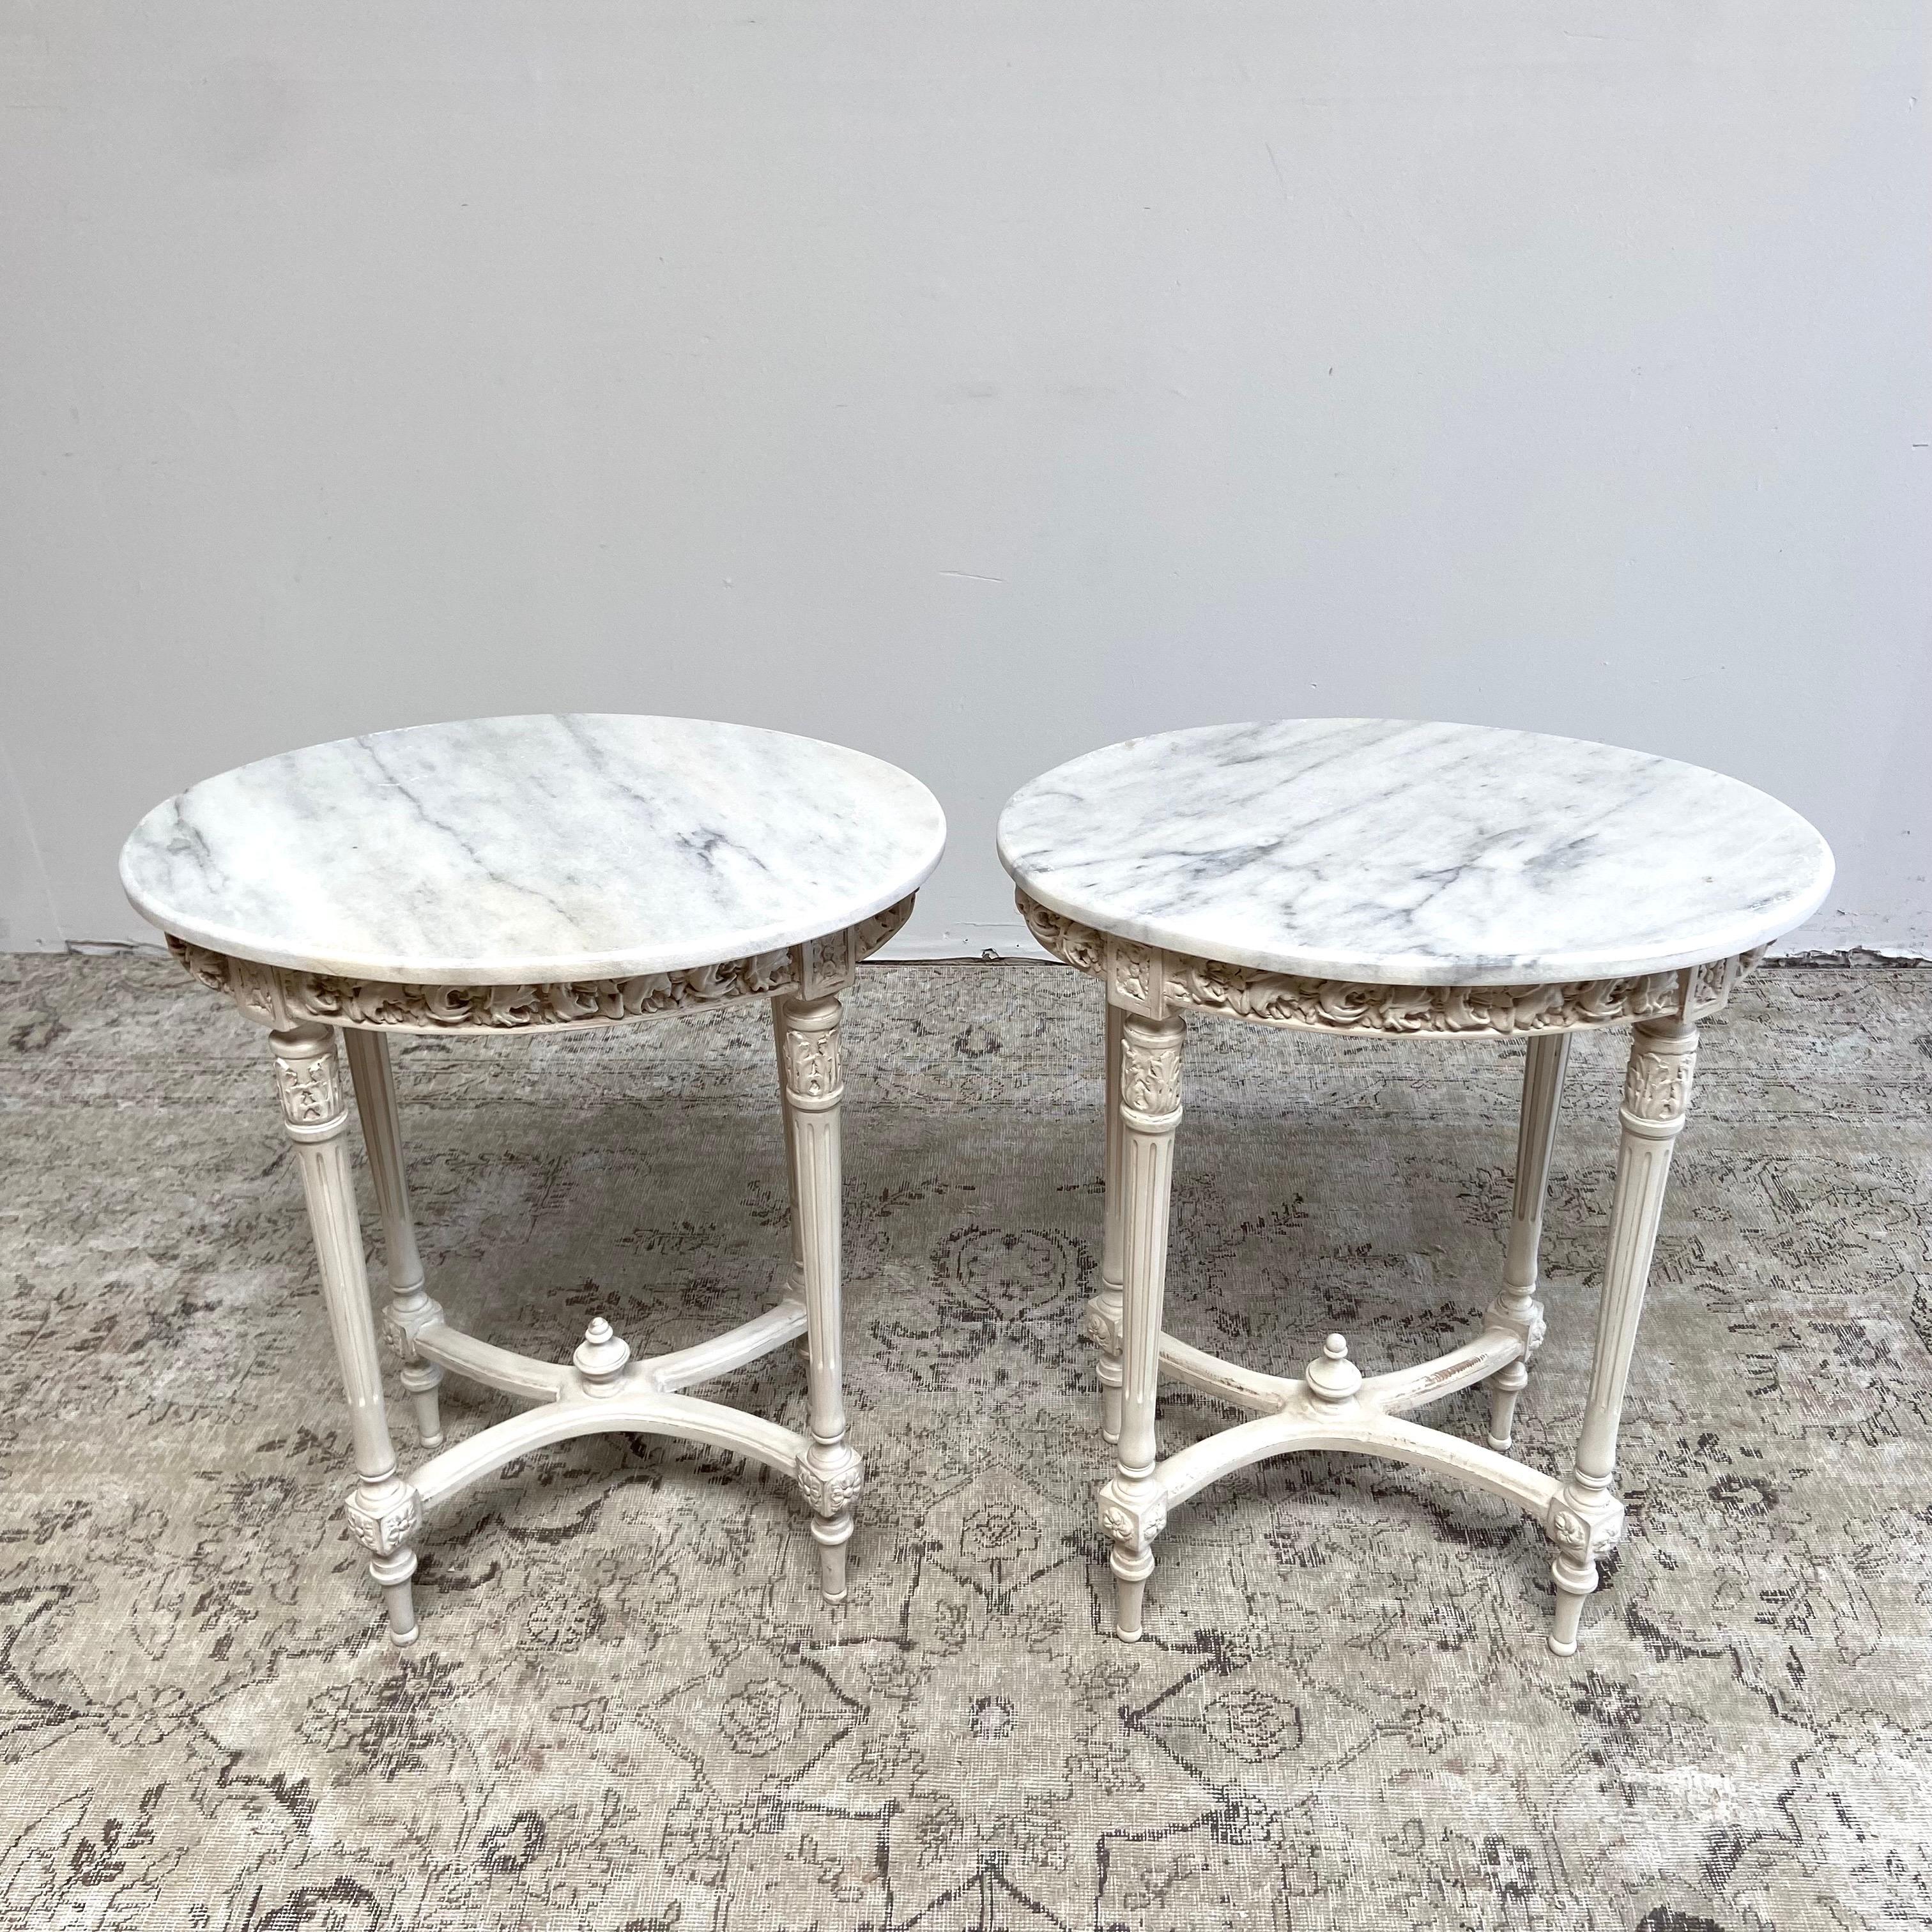 Vintage rose carved oval side table with marble top
Painted in a soft oyster white finish with subtle distressed edges and antique glazed patina.
Rough natural cut marble, semi-honed finish. 
Size: 25” W x 19” D x 29” H
Sold individually please